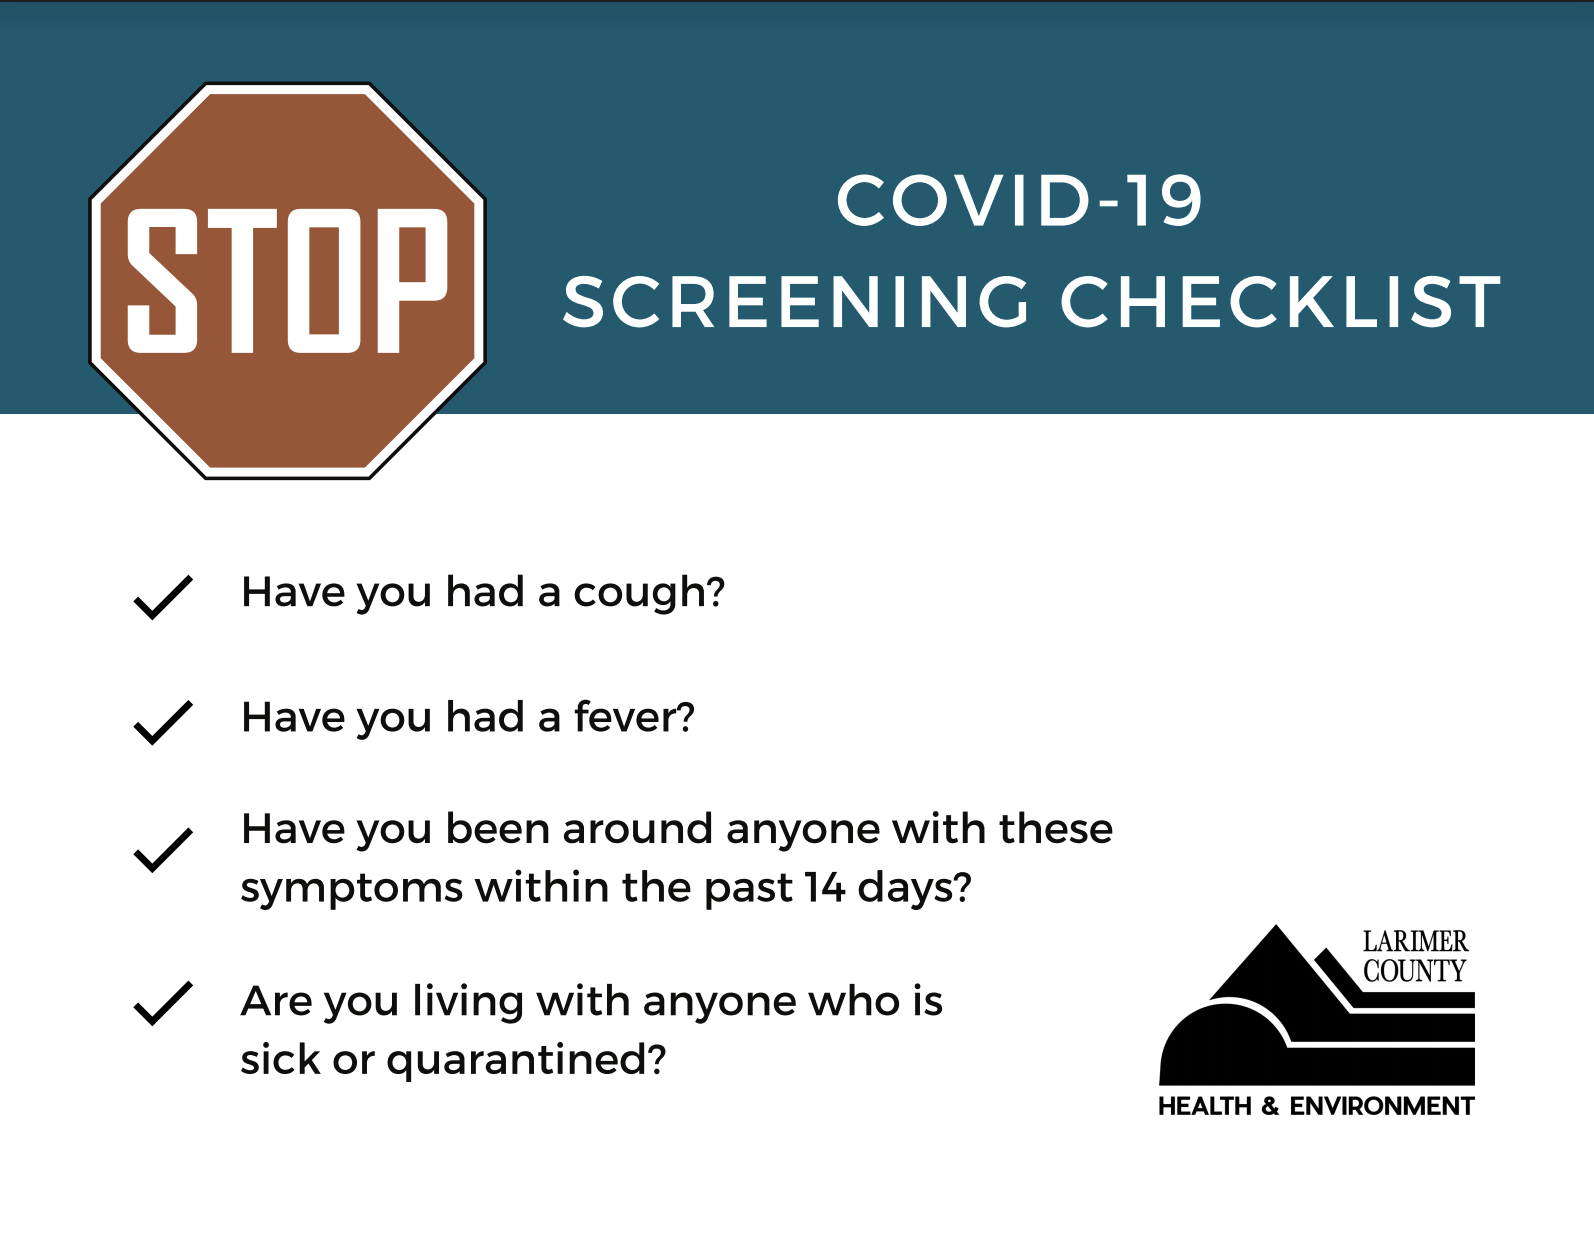 Have you had a cough, fever, been around anyone who has had these symptoms in the last 14 days, or are you living with someone who is sick or quarantined?